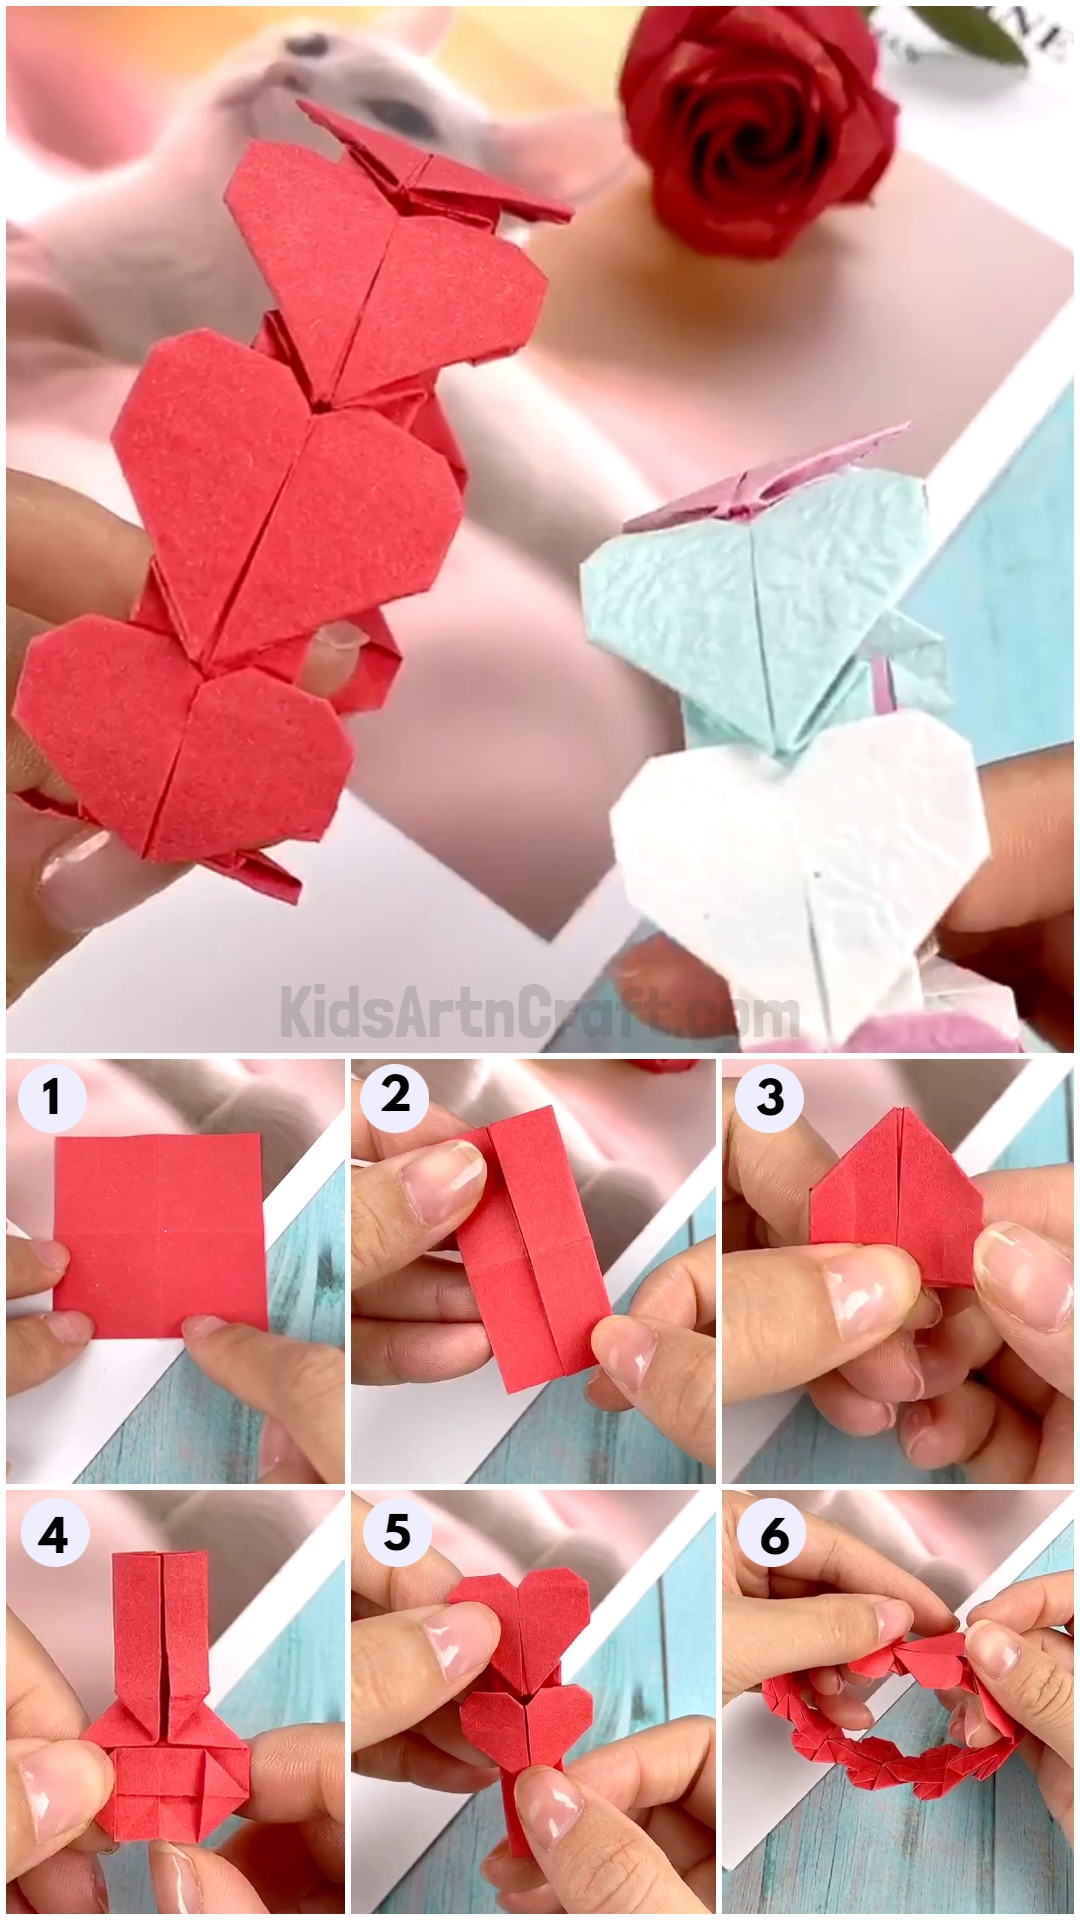 HOW TO MAKE FRIENDSHIP BRACELET WITH PAPER I EASY DIY PAPER CRAFTS - YouTube